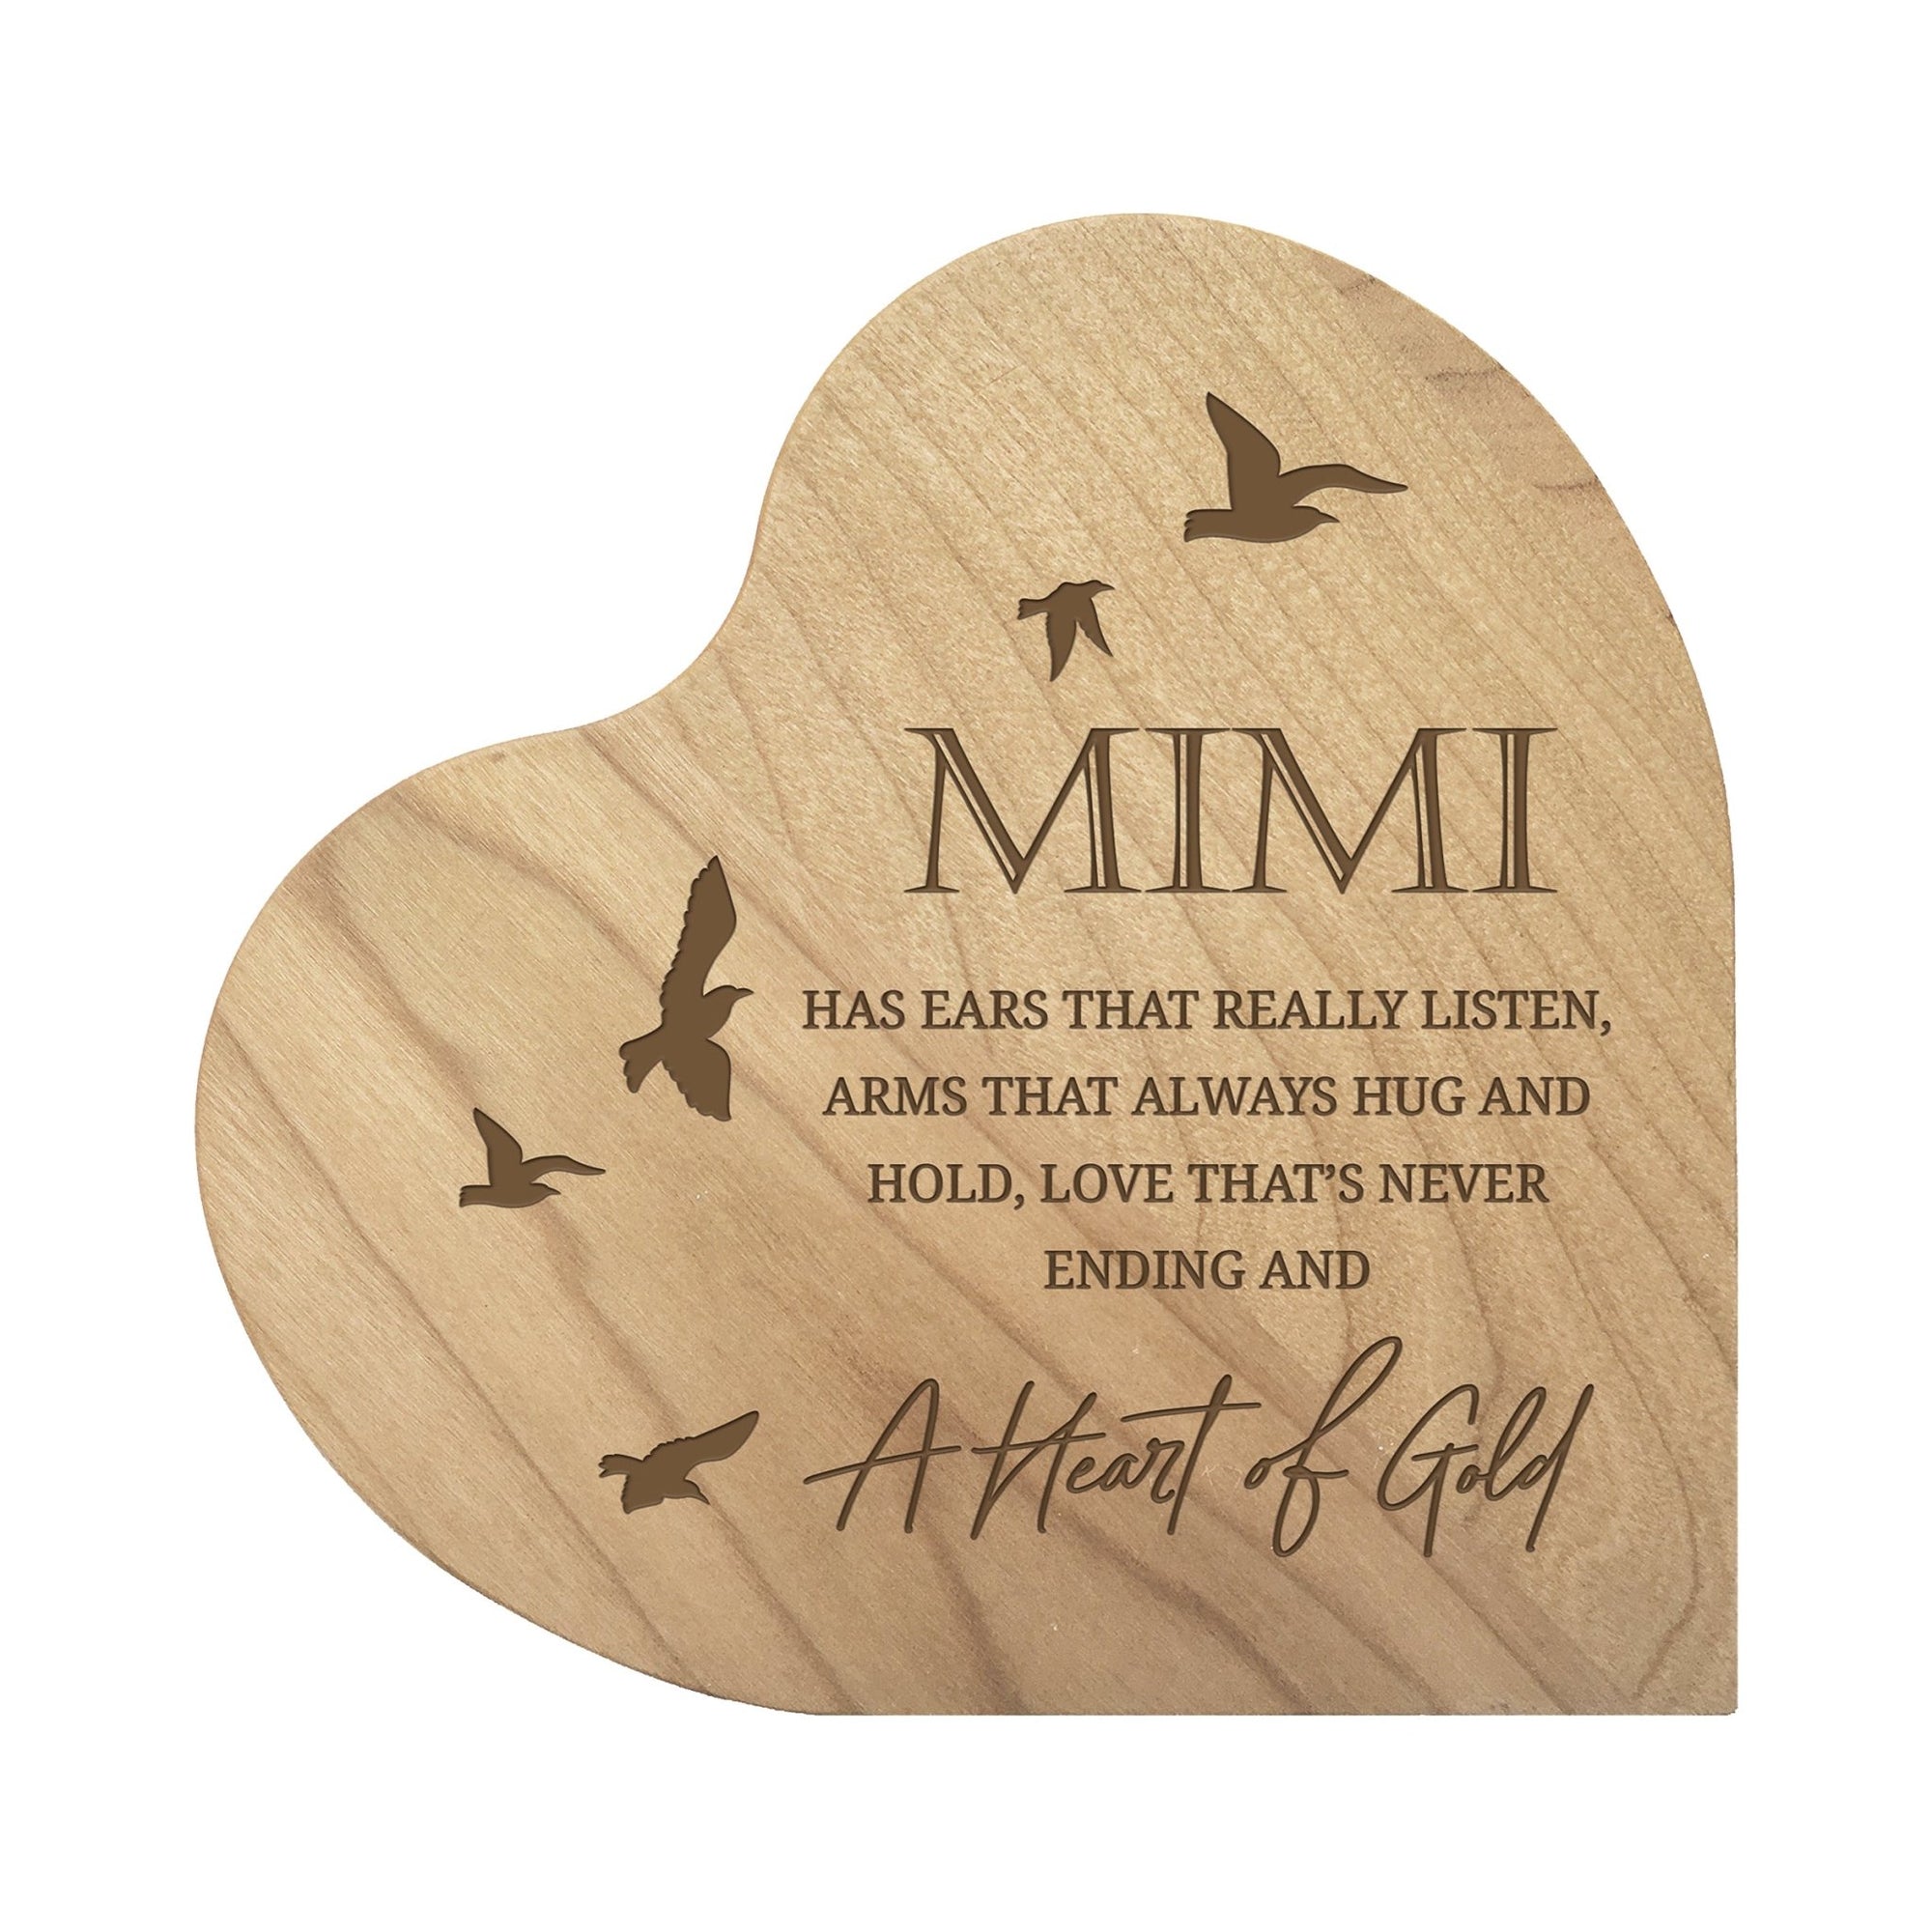 Modern Mimi’s Love Solid Wood Heart Decoration With Inspirational Verse Keepsake Gift 5x5.25 - Mimi Has Ears That Really = Heart Of Gold - LifeSong Milestones